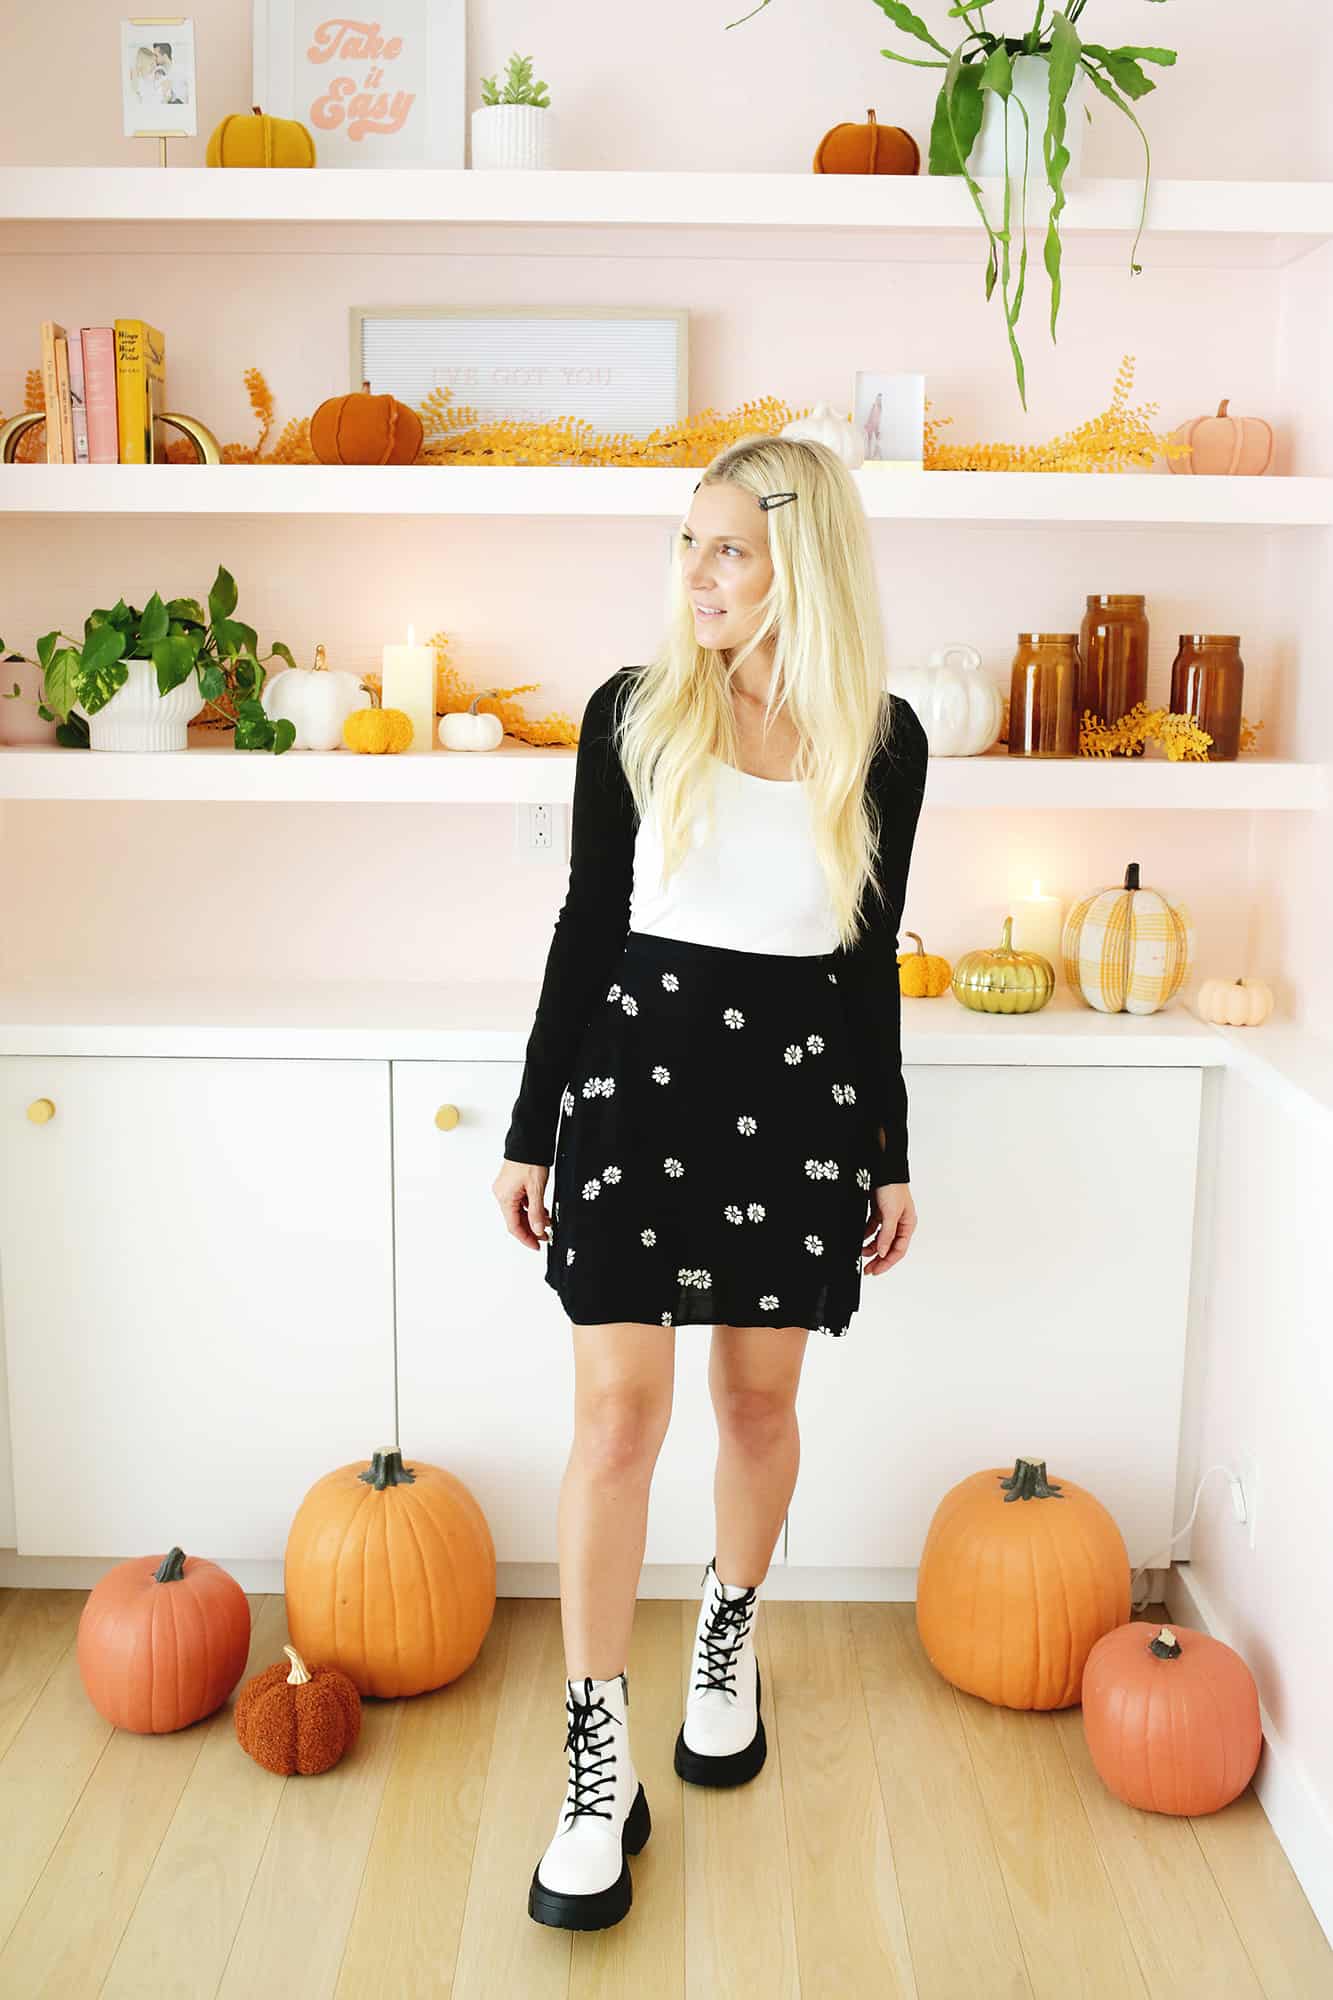 women wearing a black skirt, white boots, black sweater, and hair barrettes in front of fall styled bookshelf